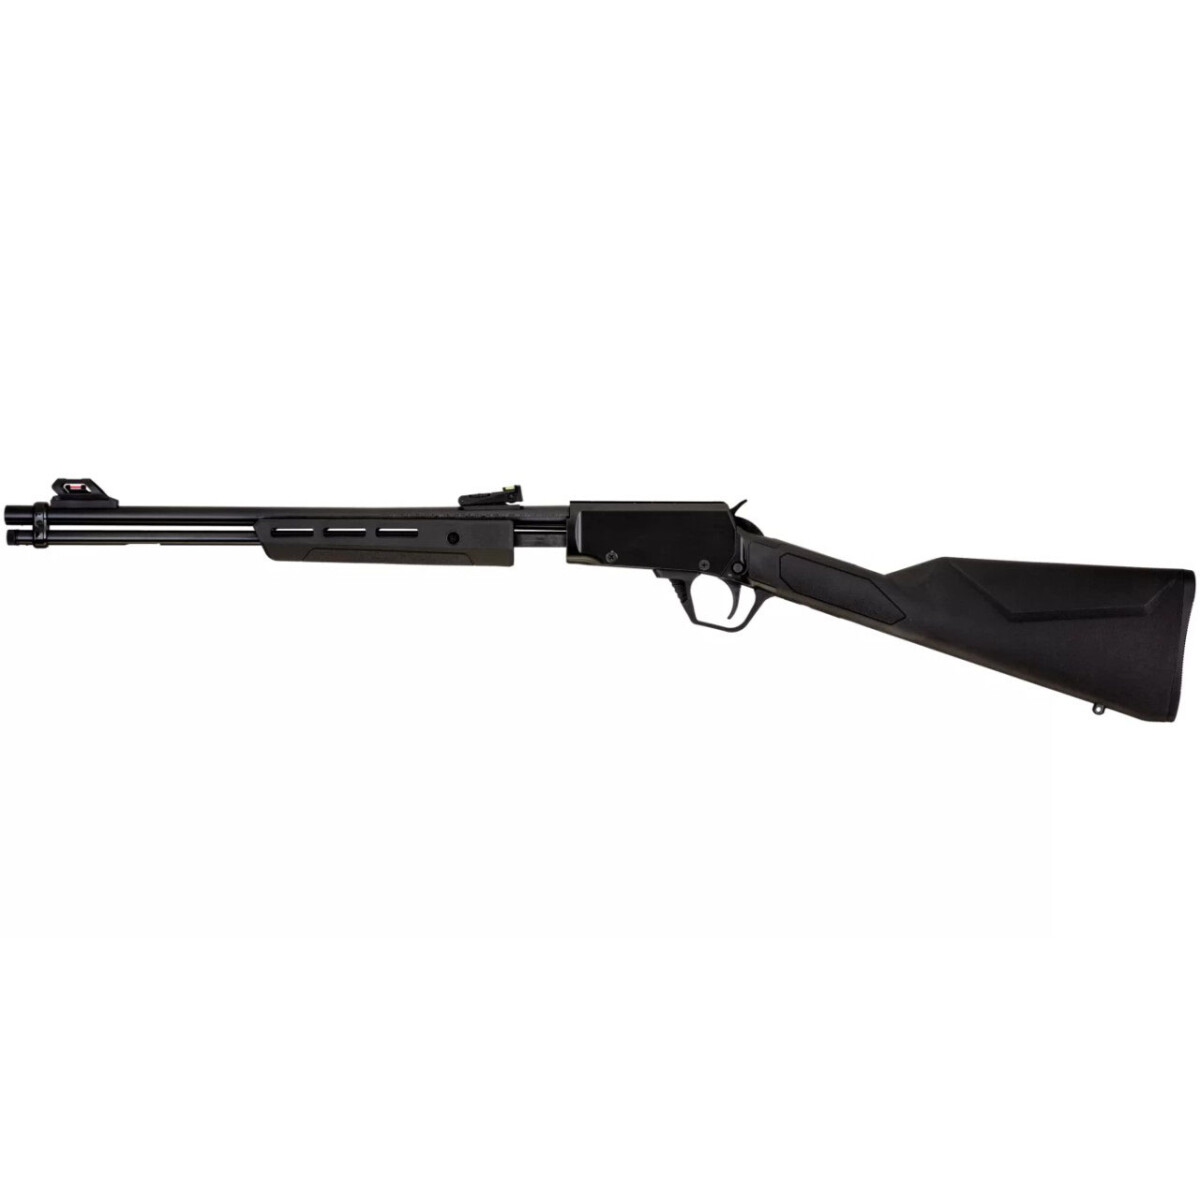 Rifle Rossi Cal 22wmr 20" Mod Gallery Syntet 